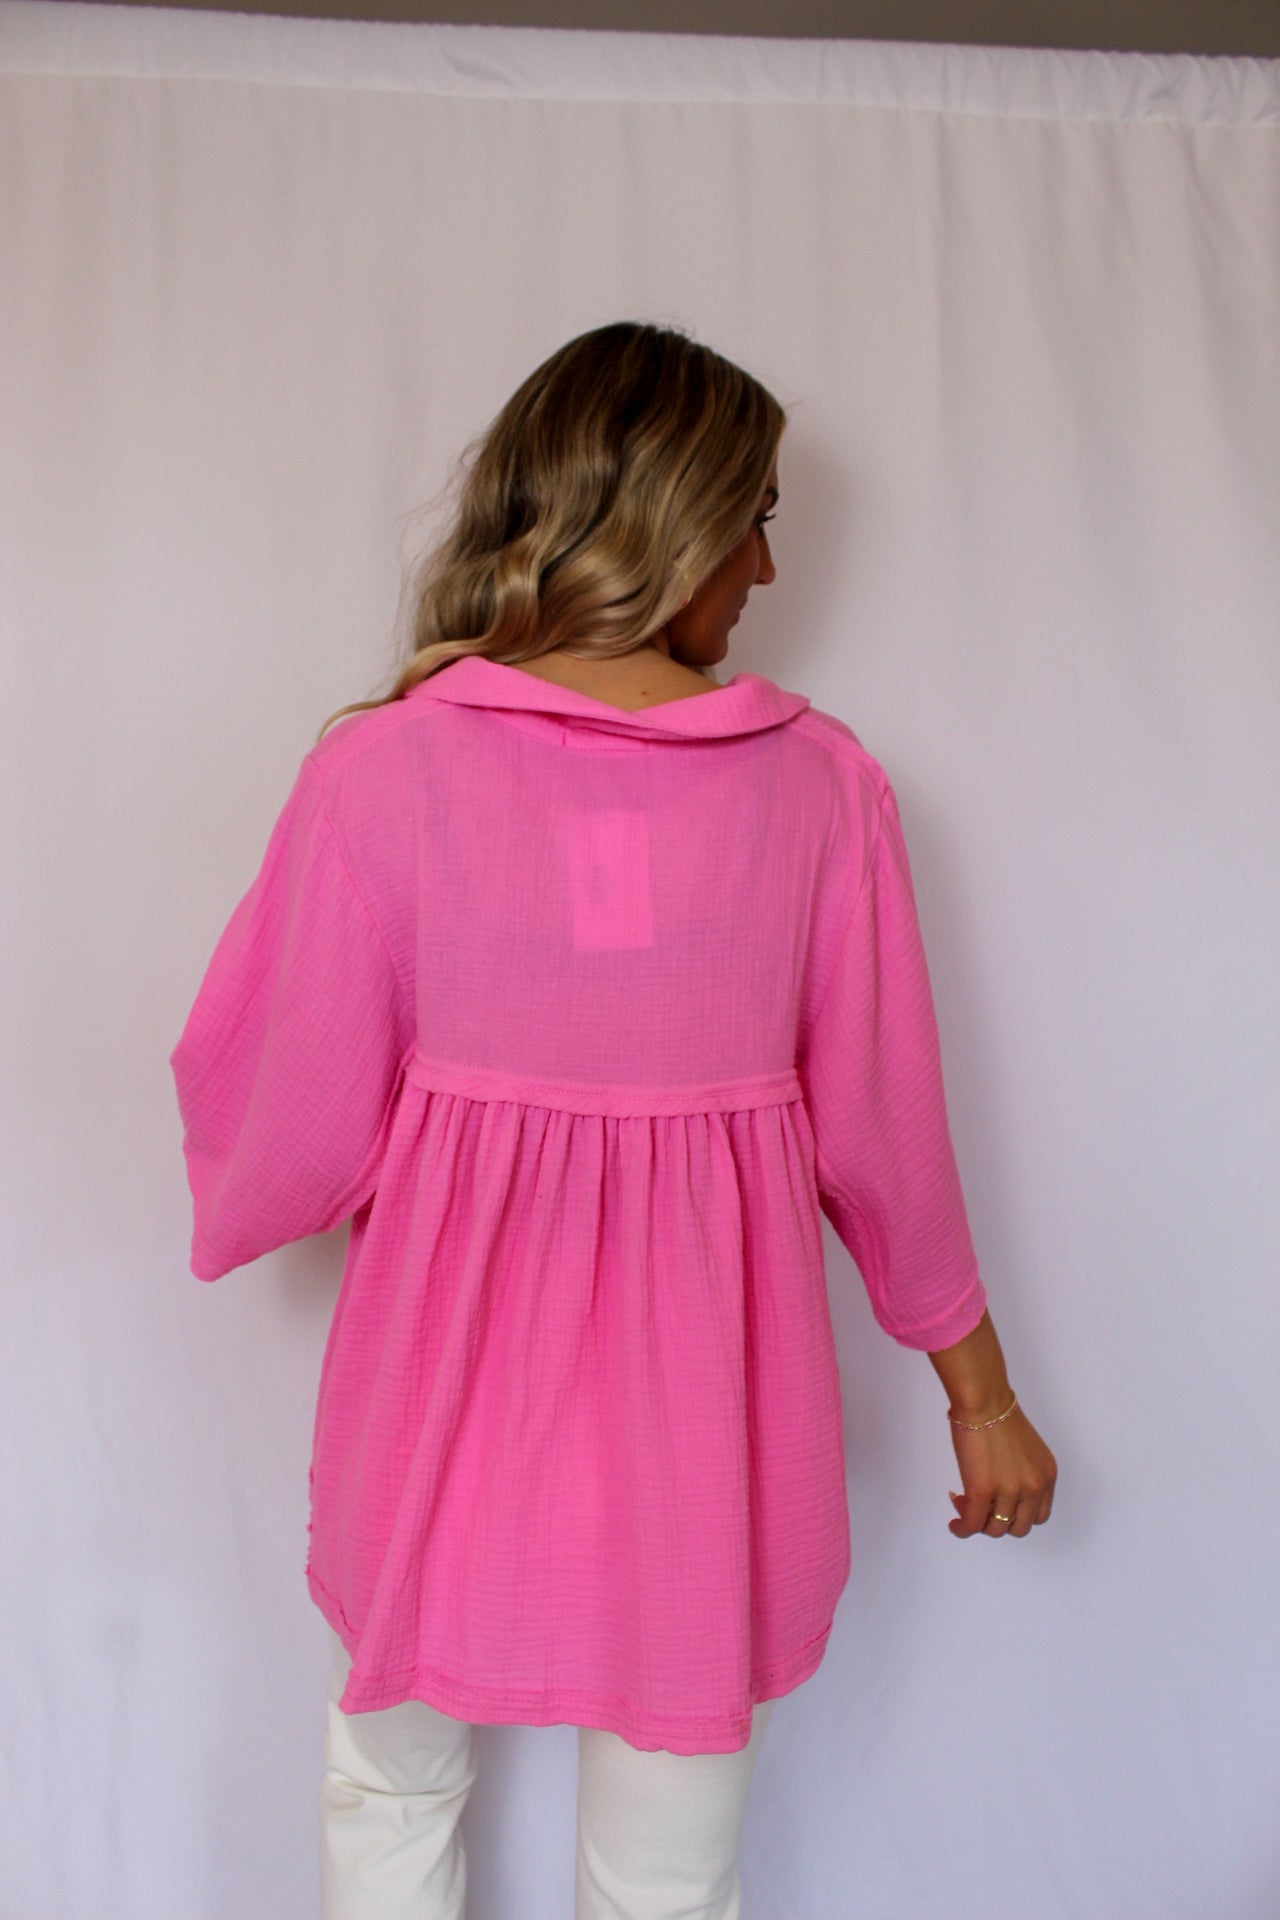 Running On Dreams Top, Pink